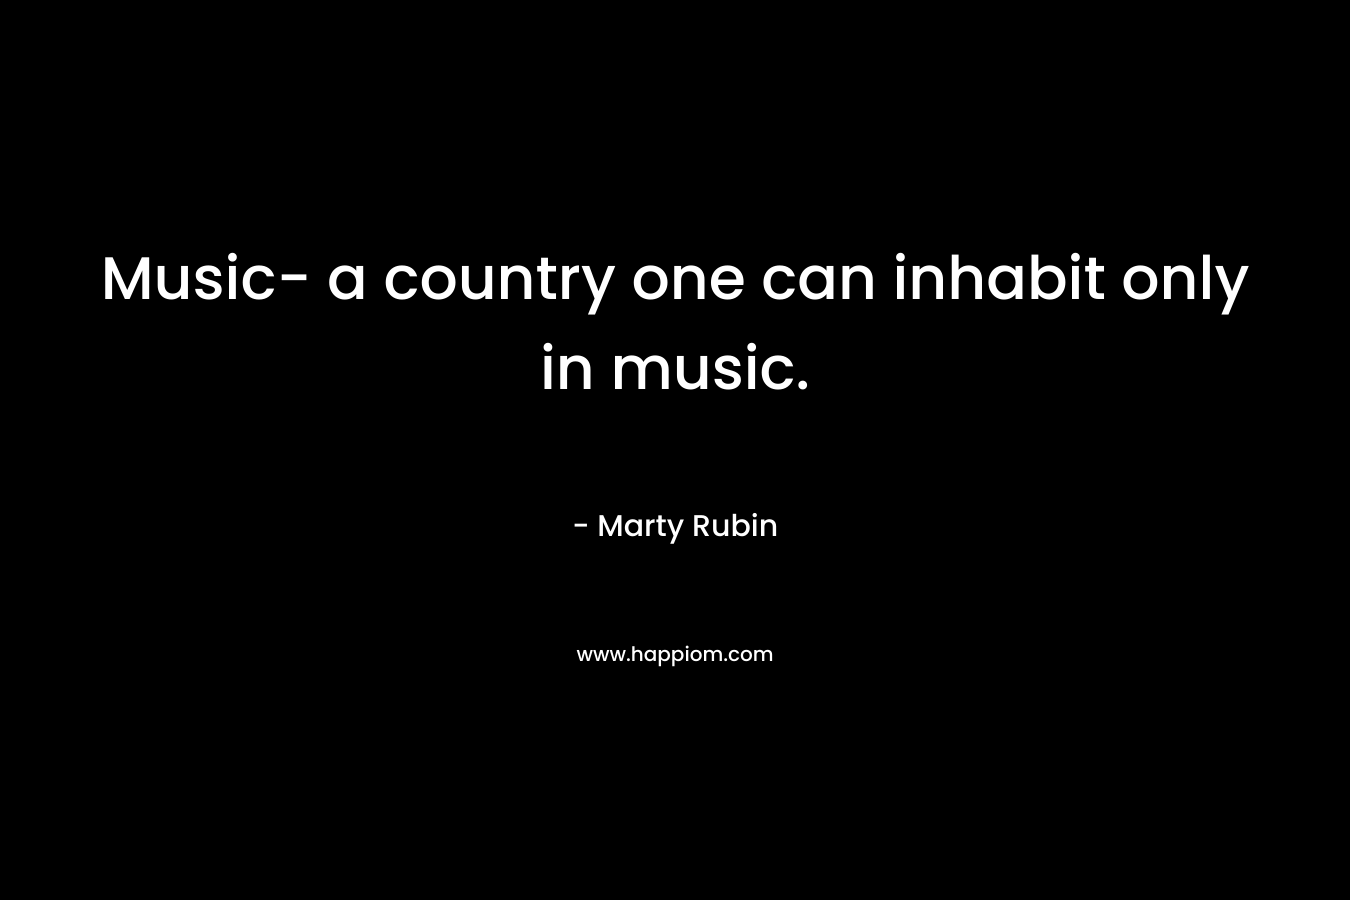 Music- a country one can inhabit only in music.